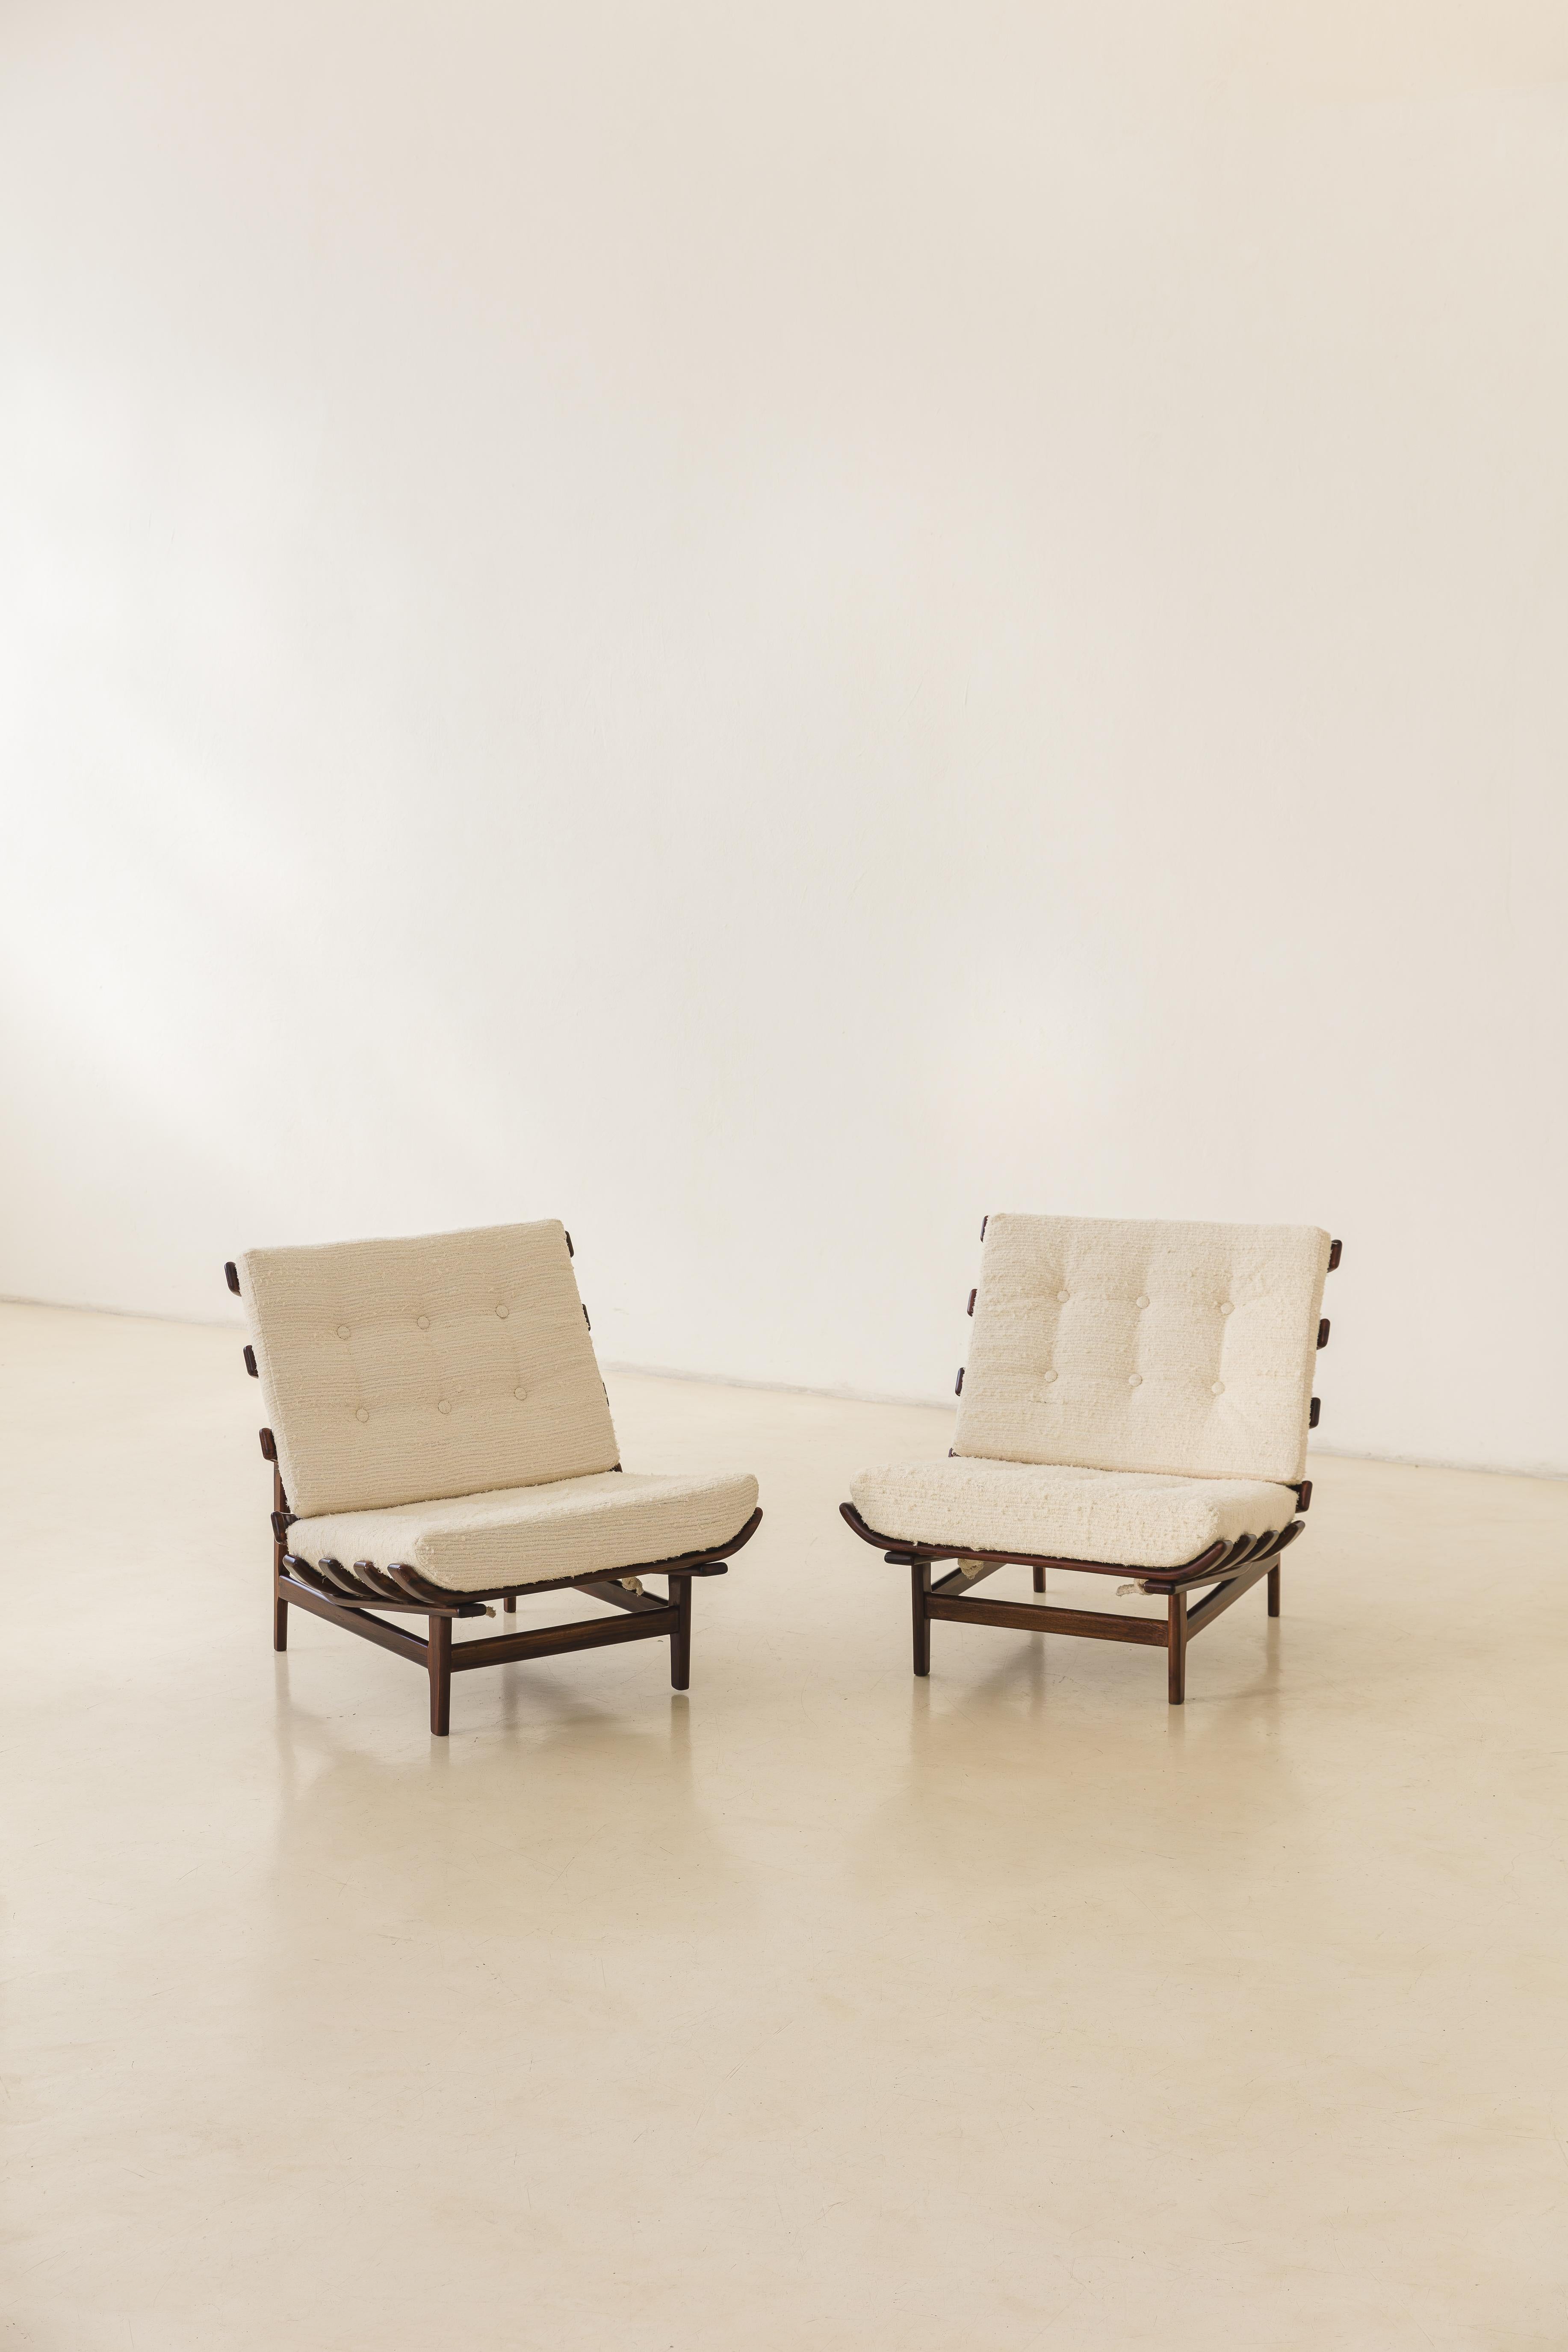 Pair of Armchairs by Móveis de Madeira Pailar, 1960s For Sale 1